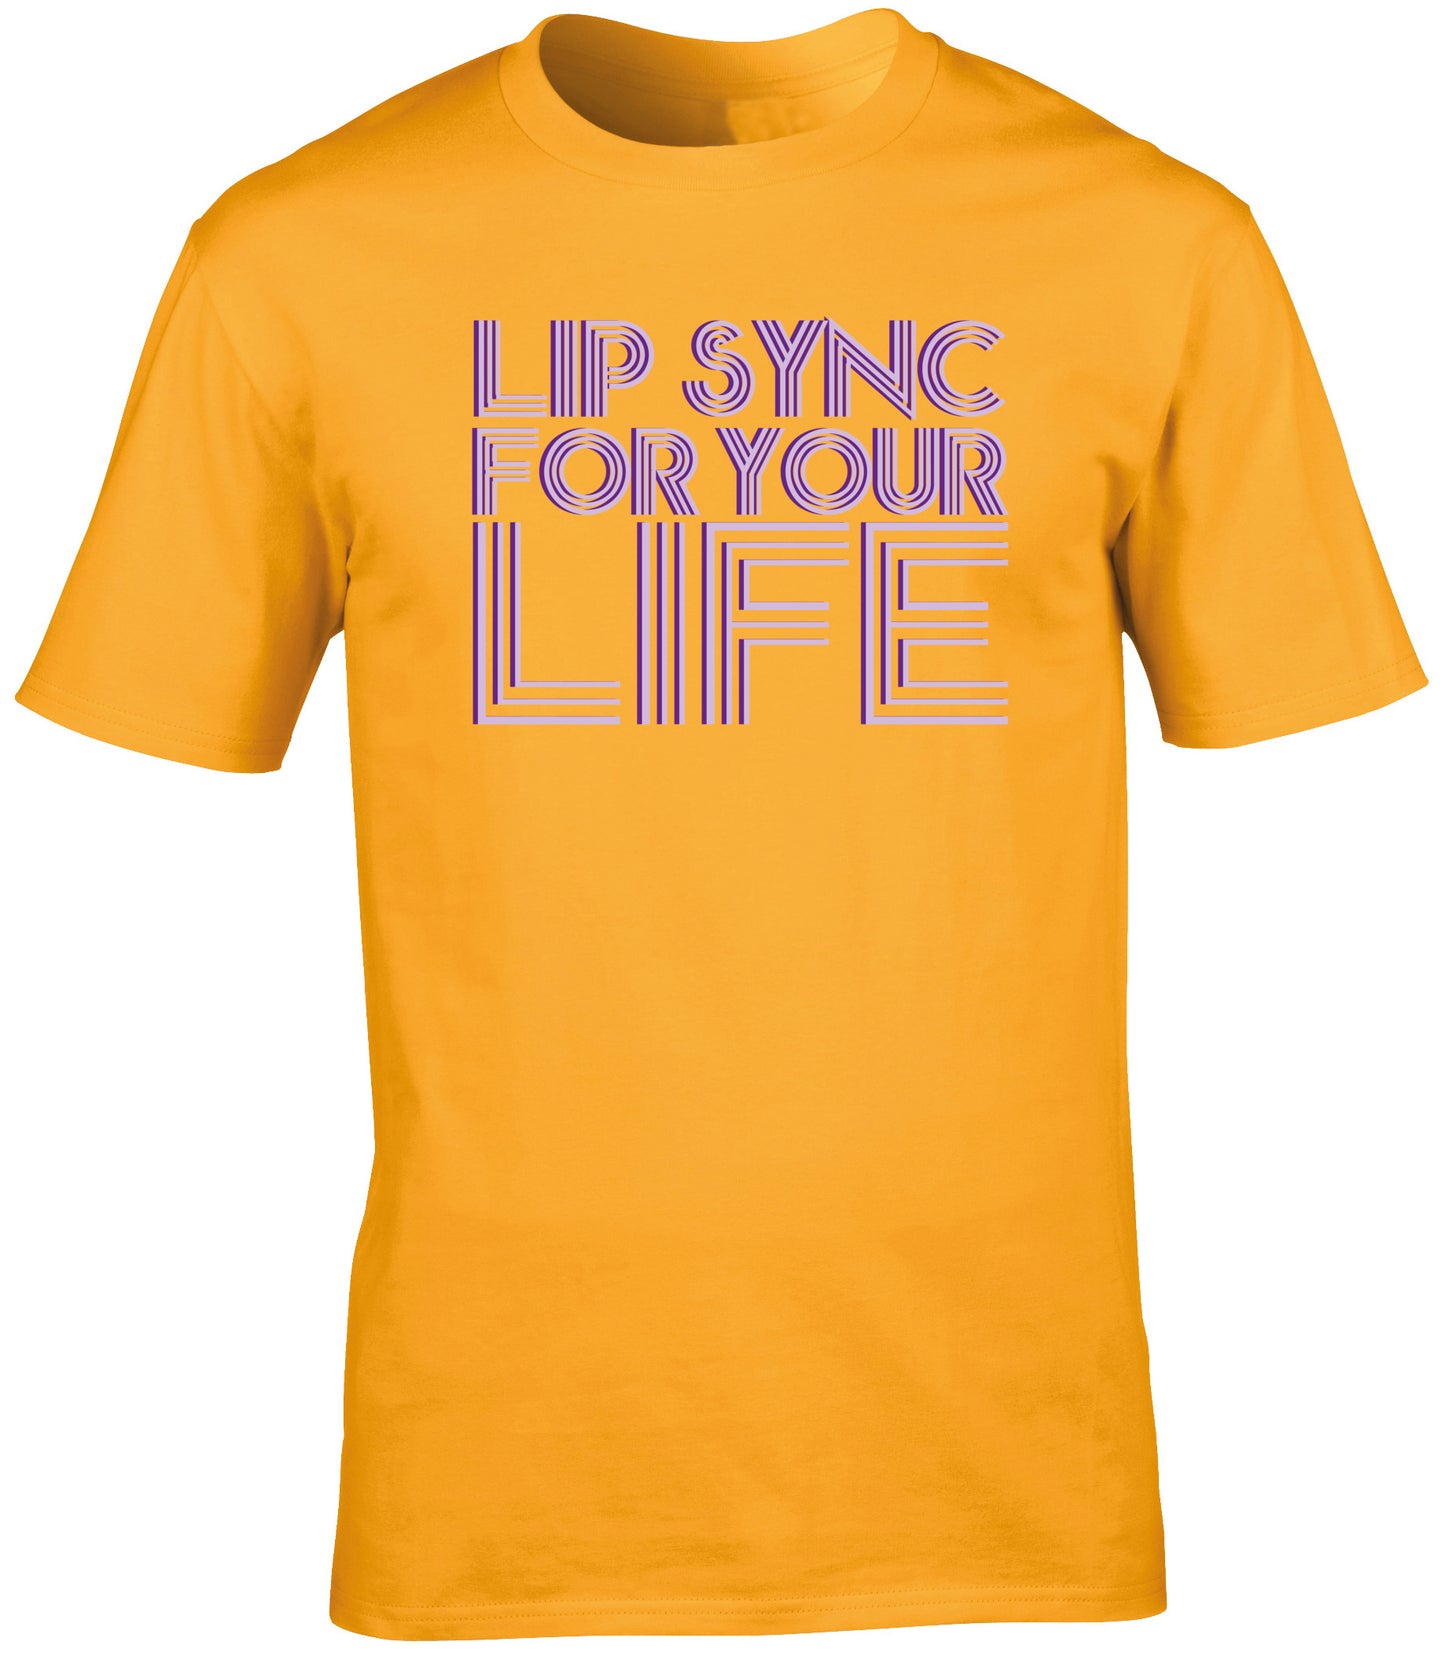 Lip sync for your life unisex t-shirt